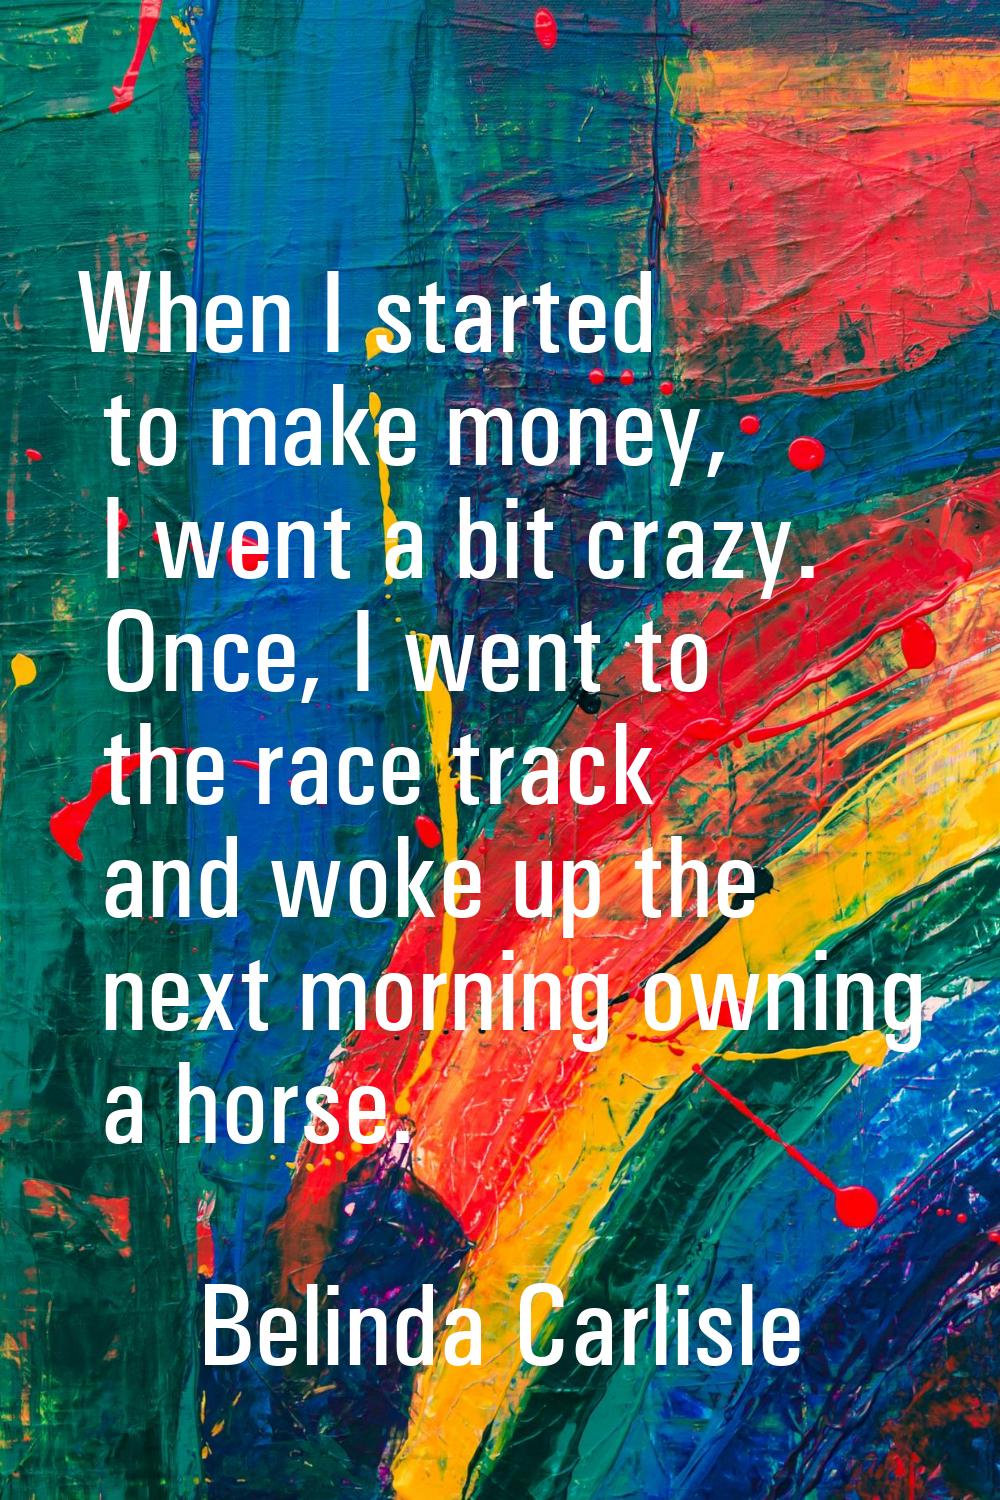 When I started to make money, I went a bit crazy. Once, I went to the race track and woke up the ne